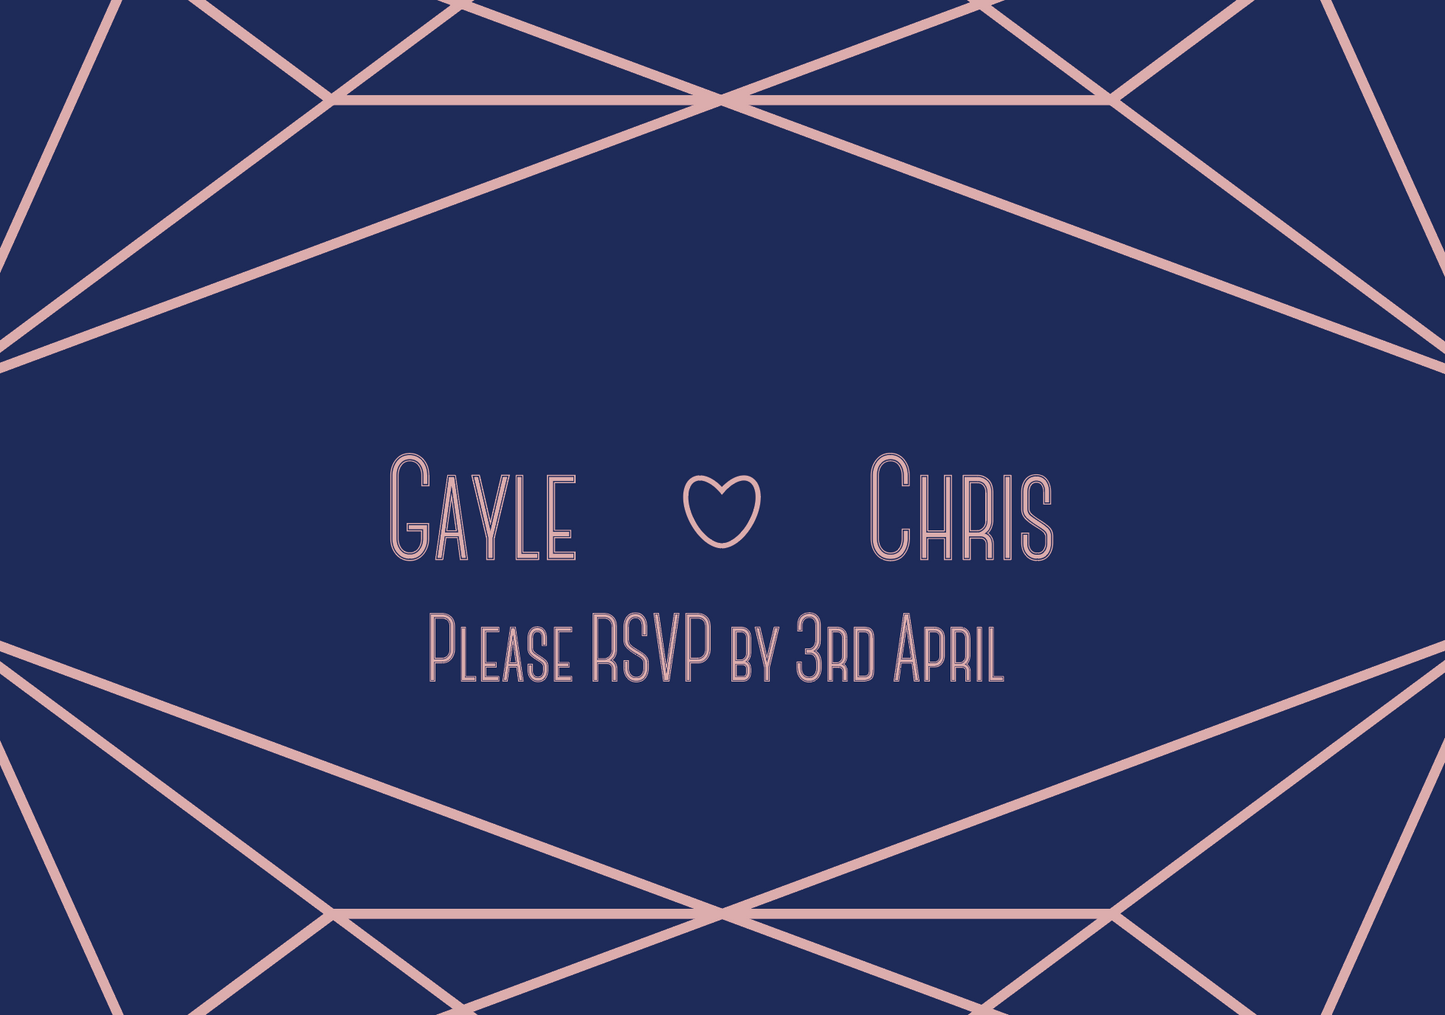 Double-sided A7 RSVP. This side has a full navy blue background, with blush geometric shapes on the top and bottom. The text is blush, and includes the couple's name and the date that the RSVP is to be returned by.